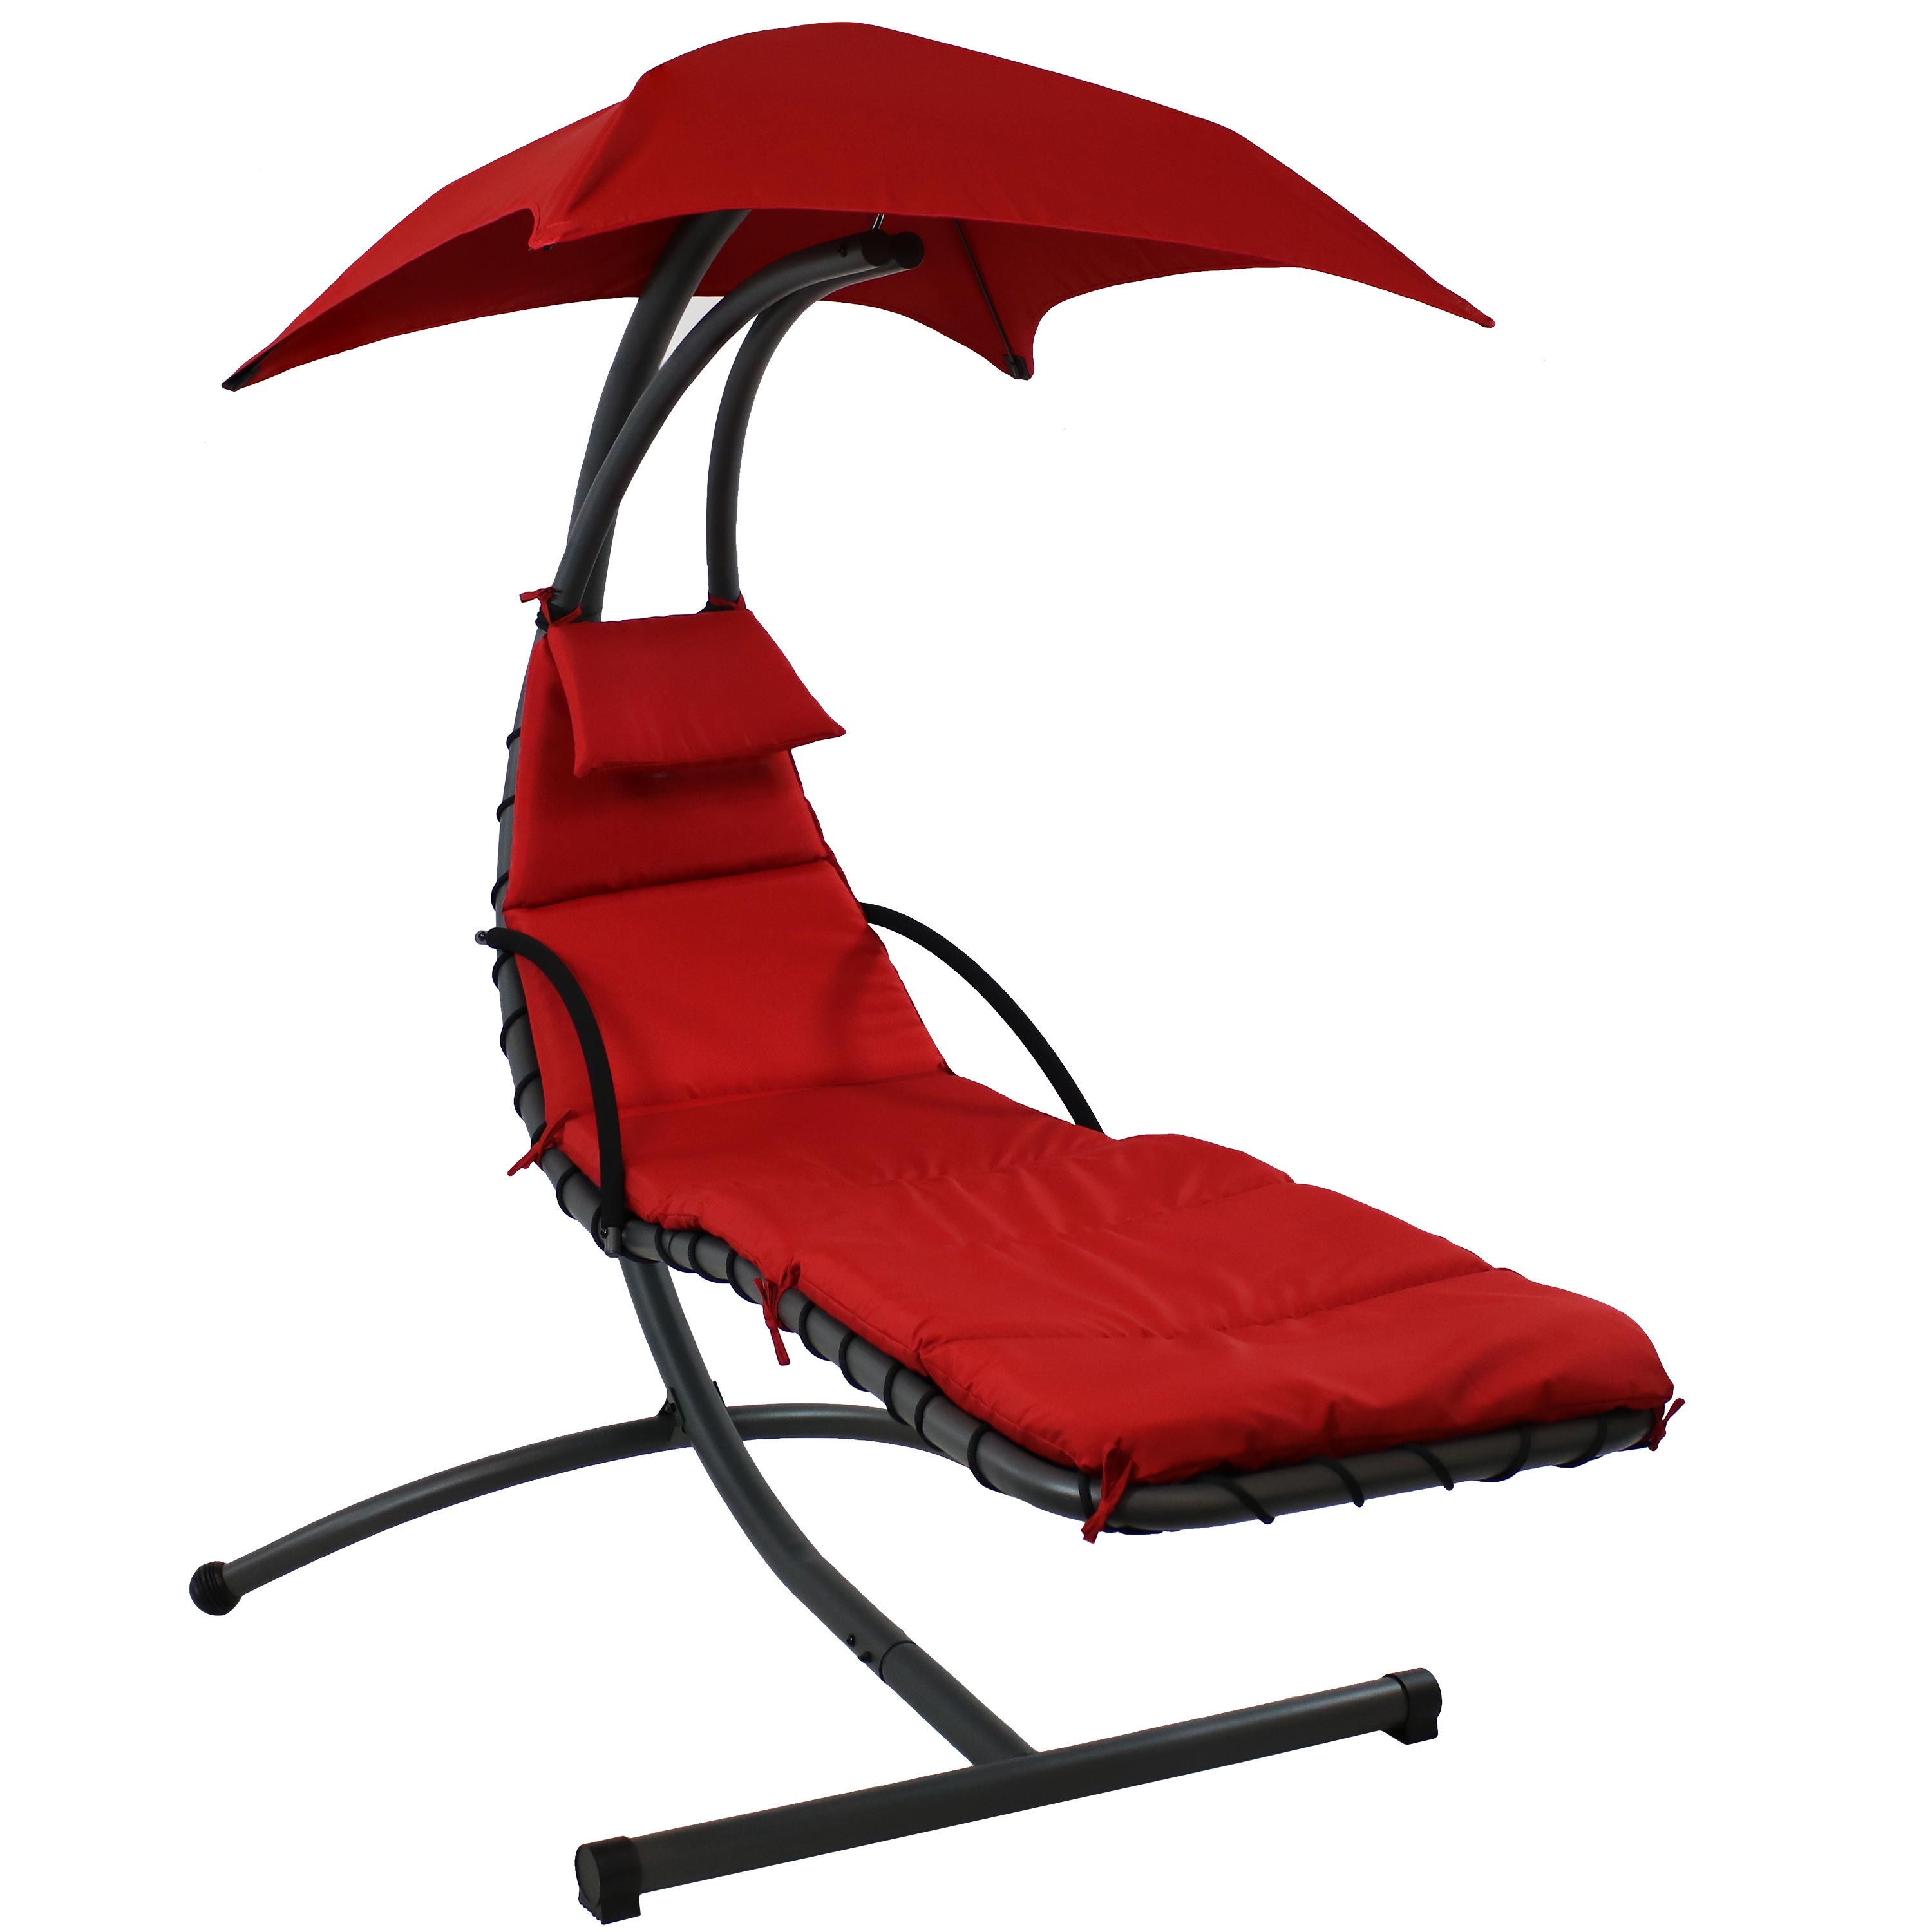 Floating Chaise Lounge Chair with Canopy and Arc Stand - Red